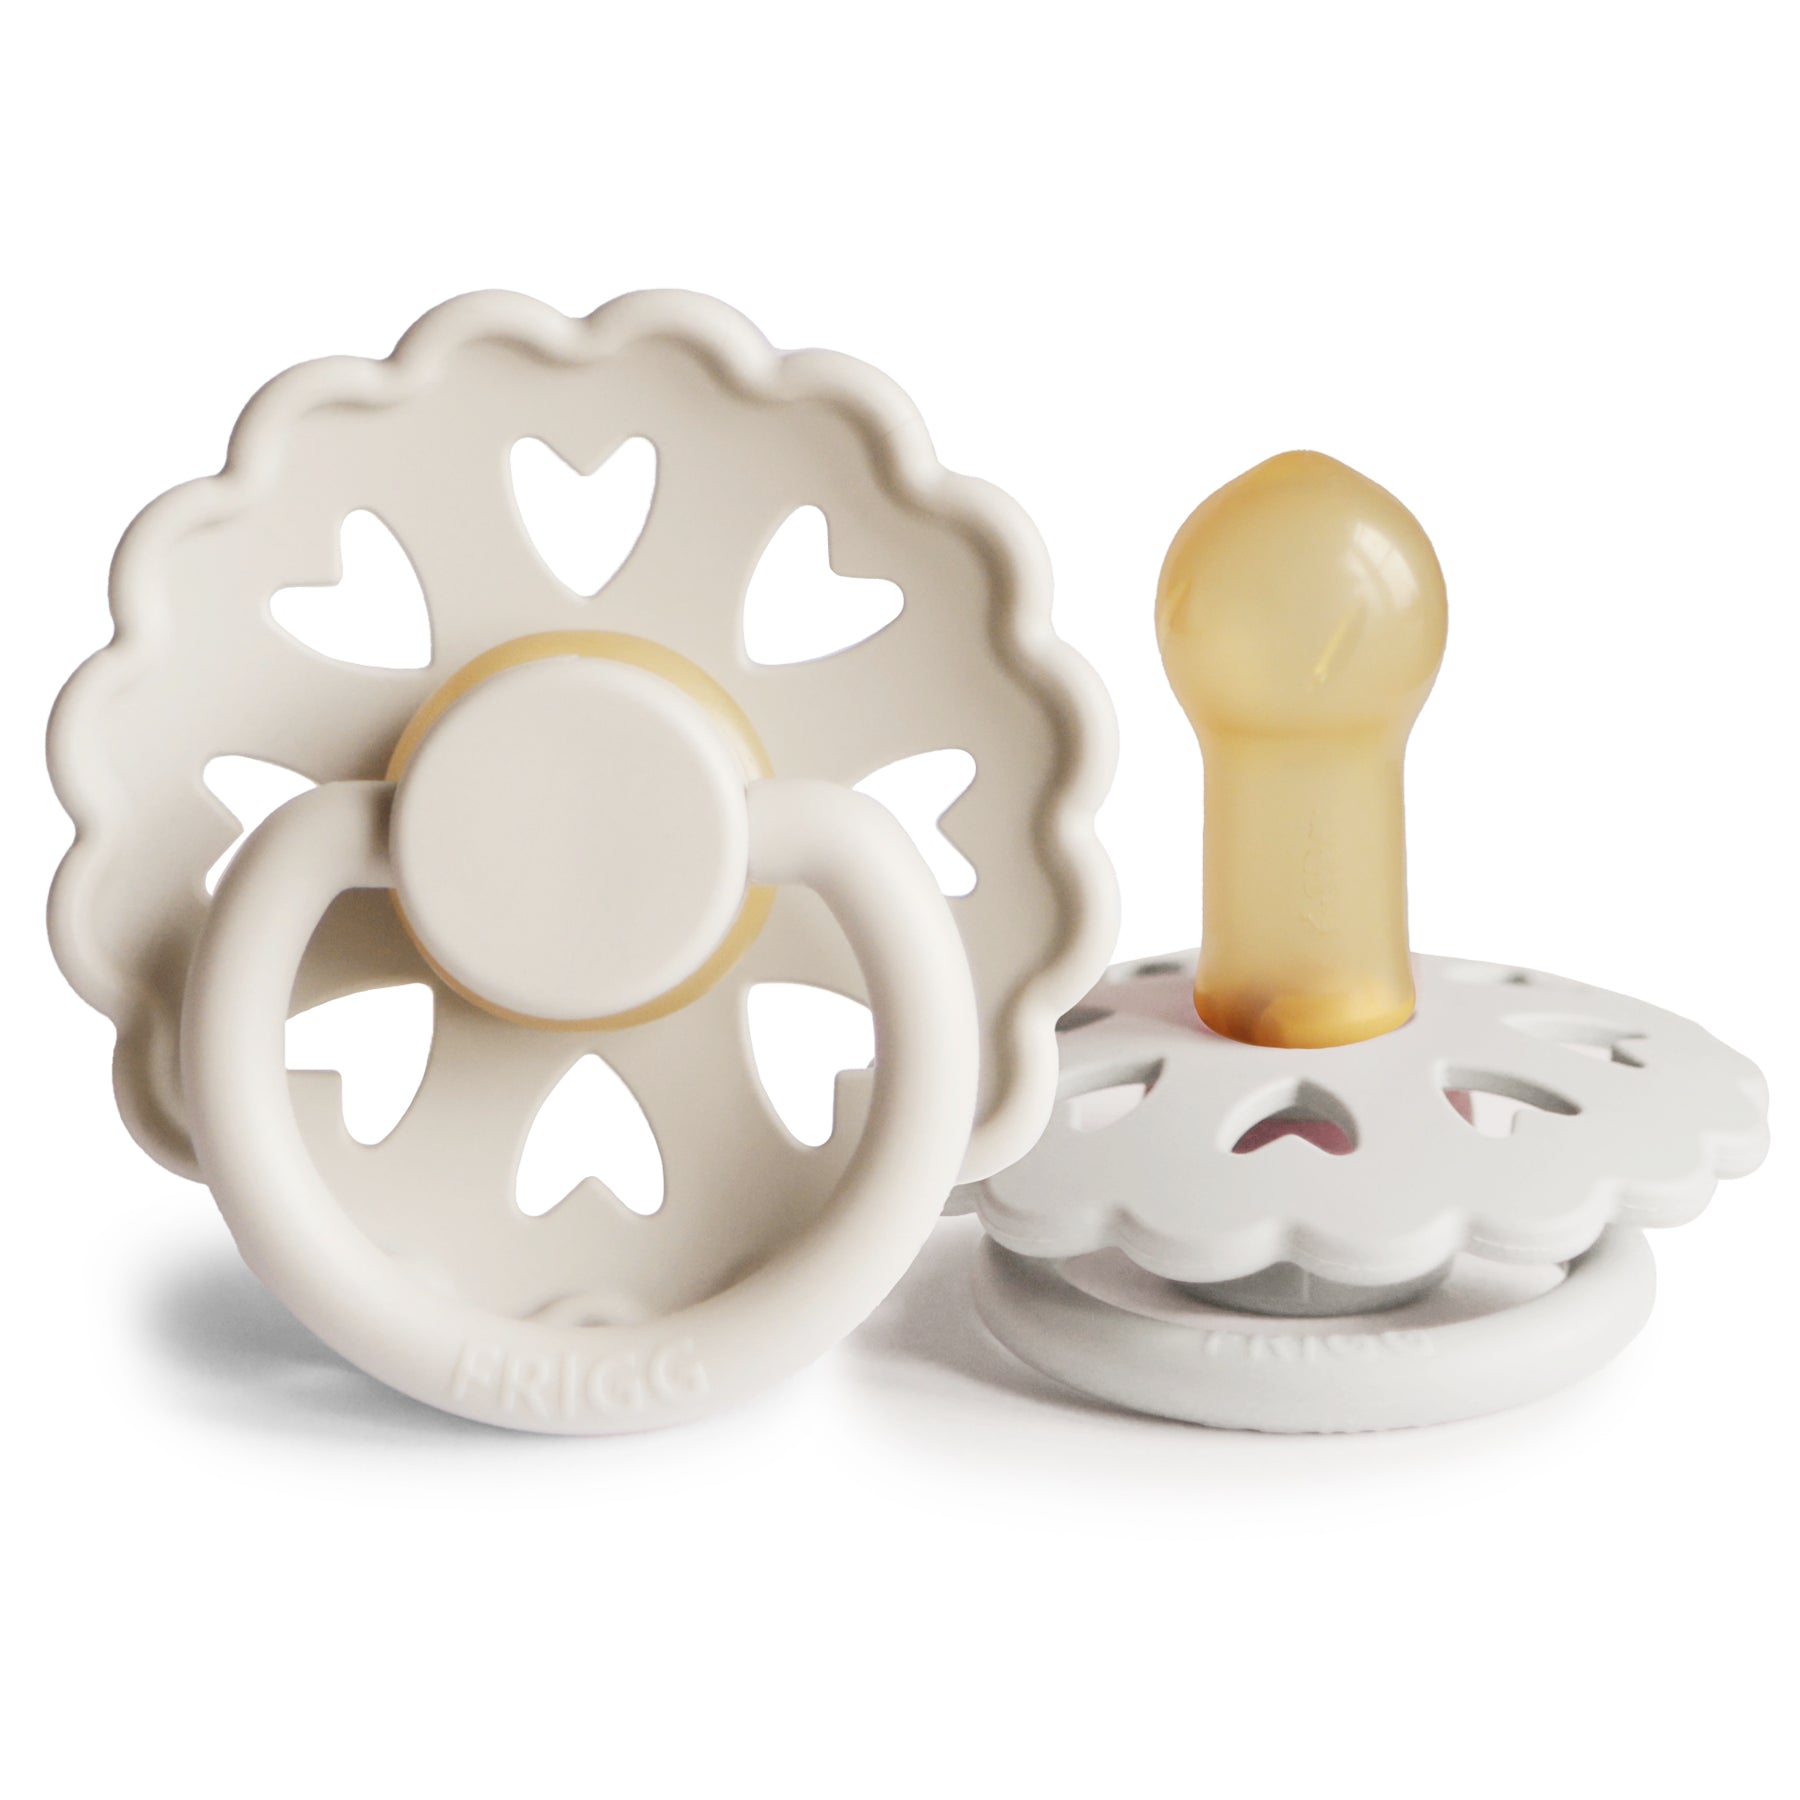 FRIGG Fairytale Latex Pacifier Dummy – The Ugly Duckling